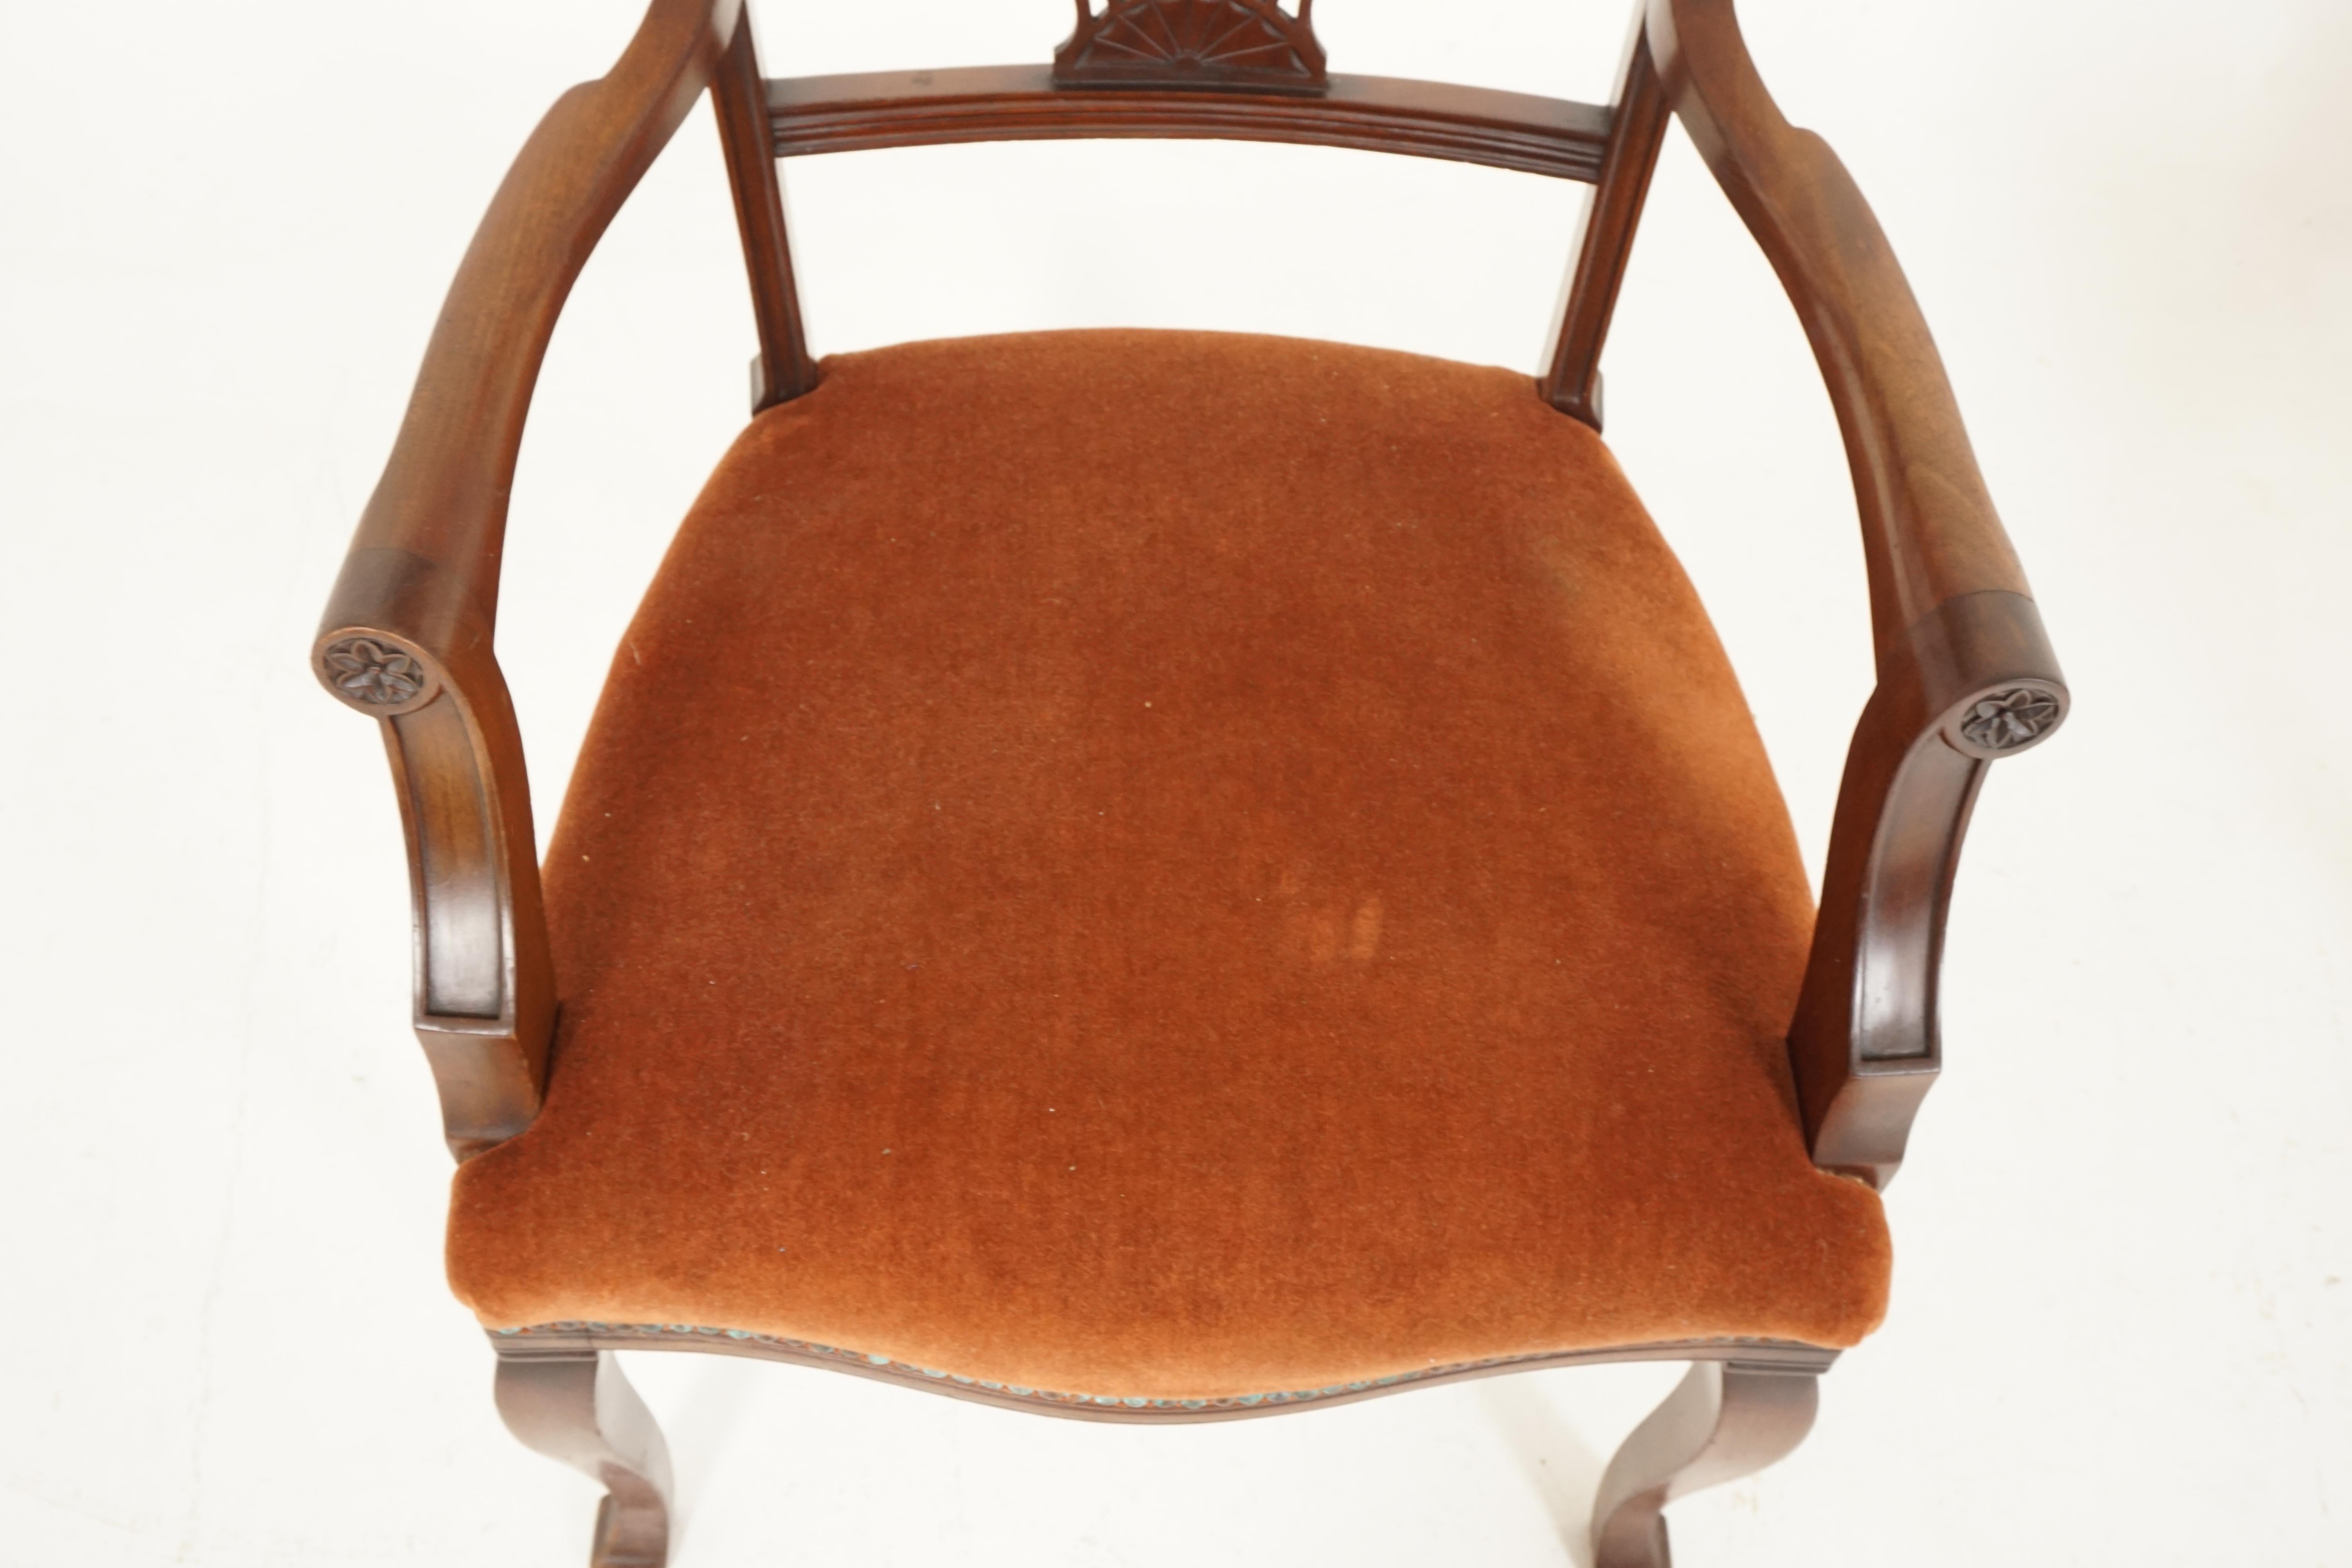 Early 20th Century Antique Walnut Arm Chairs, Edwardian, Art Nouveau, Upholstered Seat, B2344